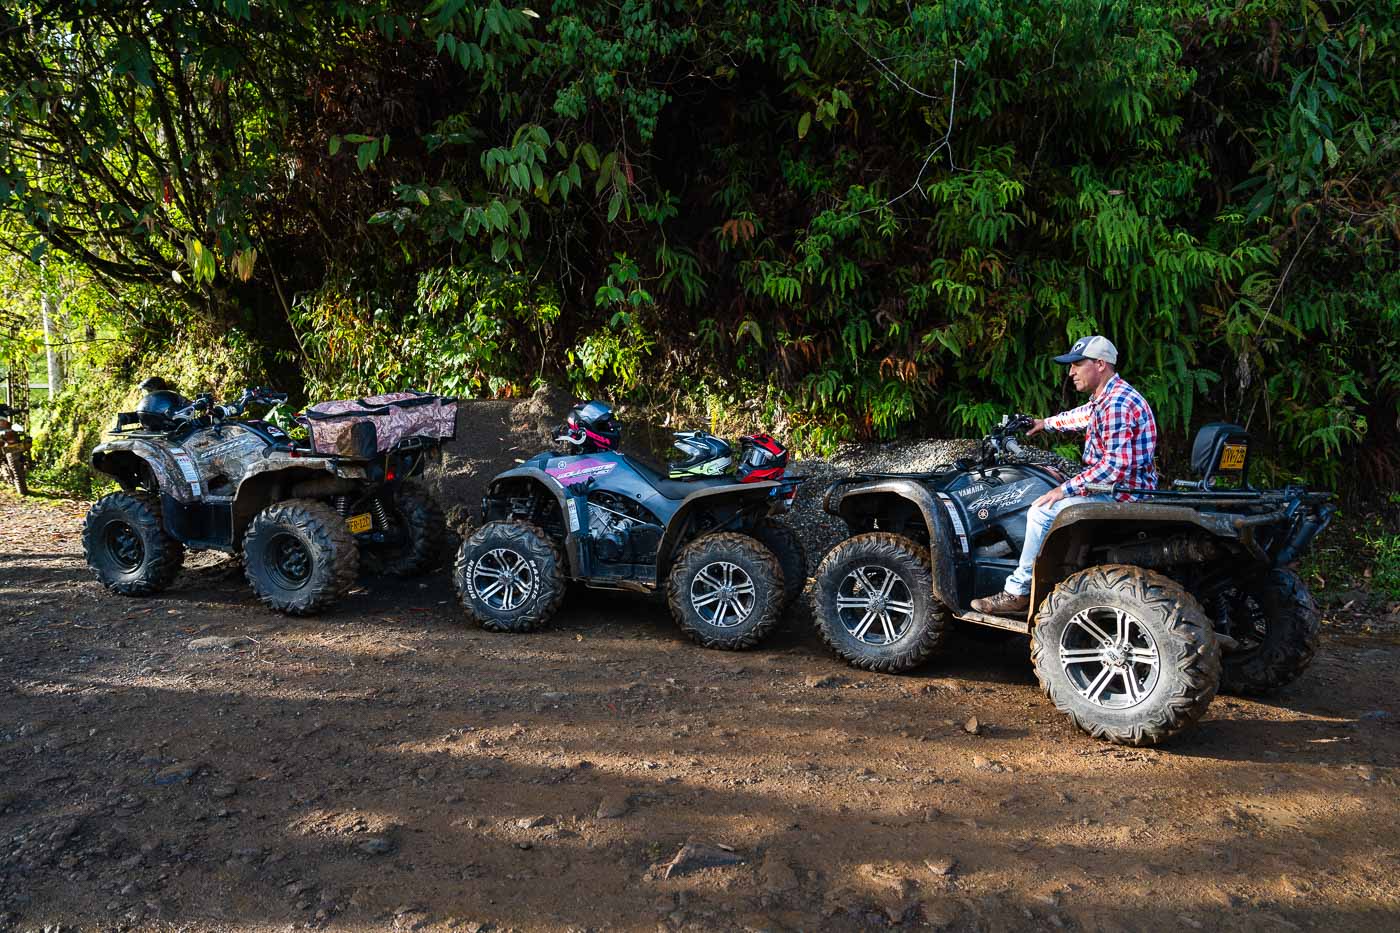 Three ATV bikes lined up in a row with a man sitting on the third one.